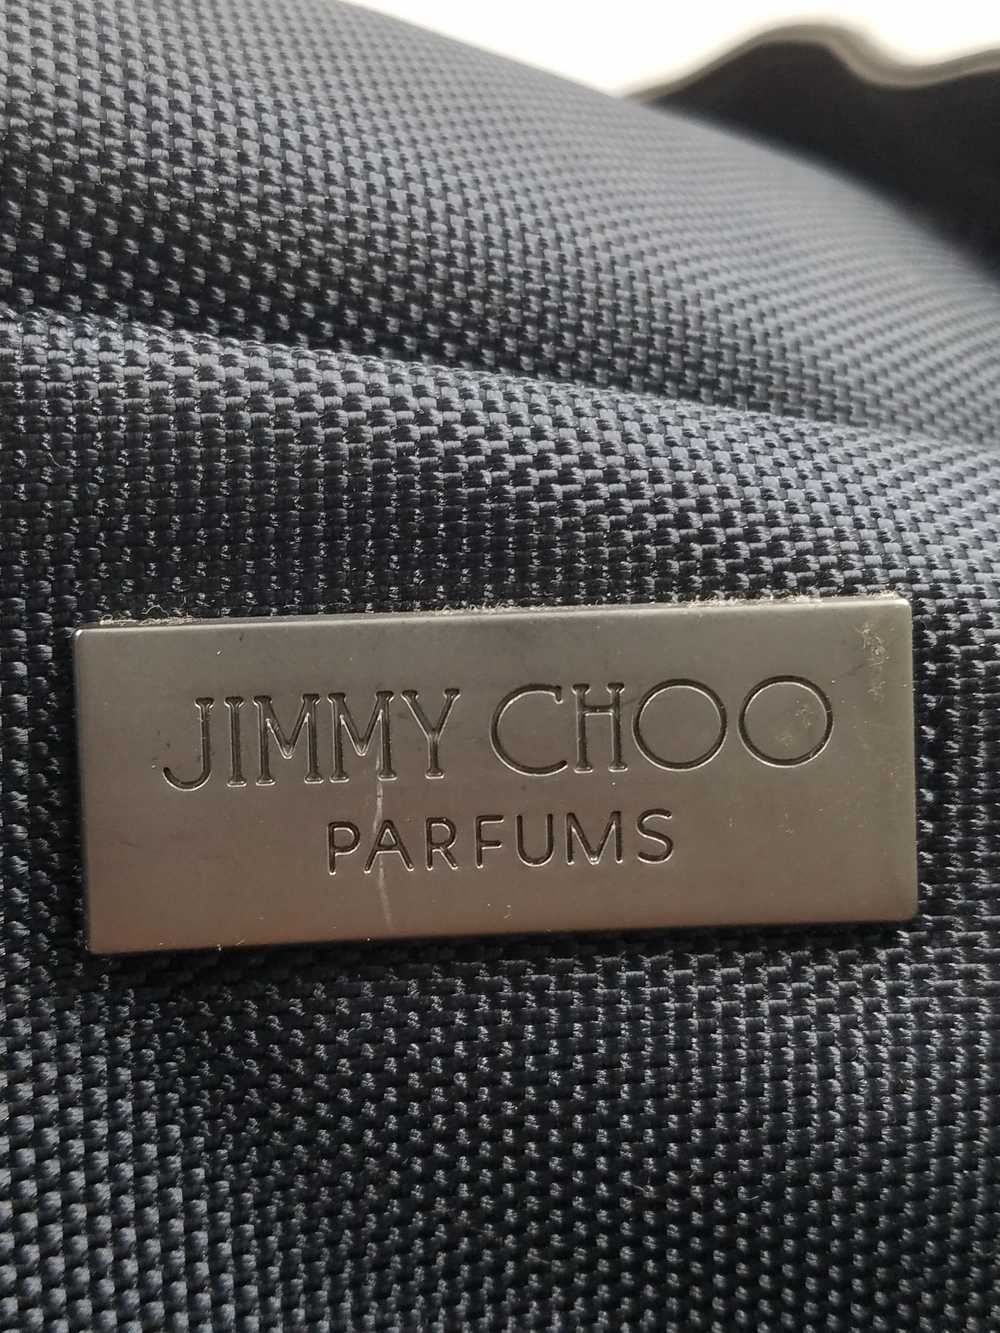 Authentic Jimmy Choo Parfums Navy Duffle Bag - image 6